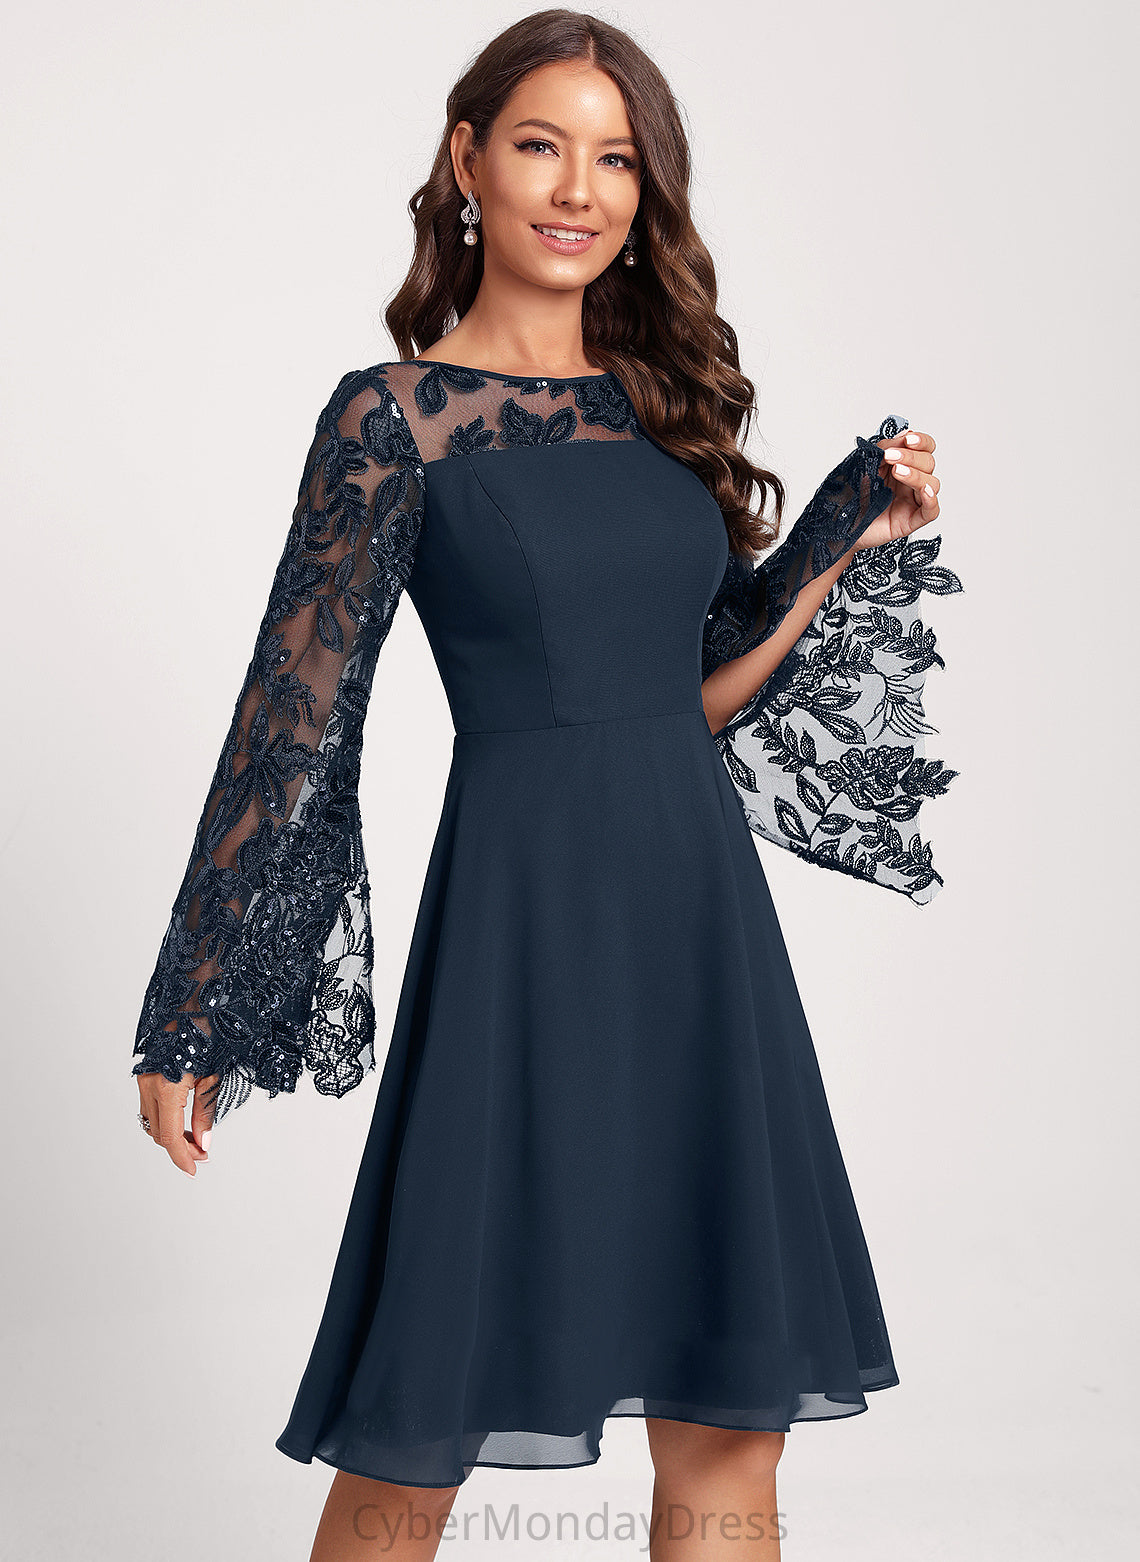 Dress Club Dresses Cocktail Chiffon Lace Scoop With Gina Sequins Knee-Length A-Line Neck